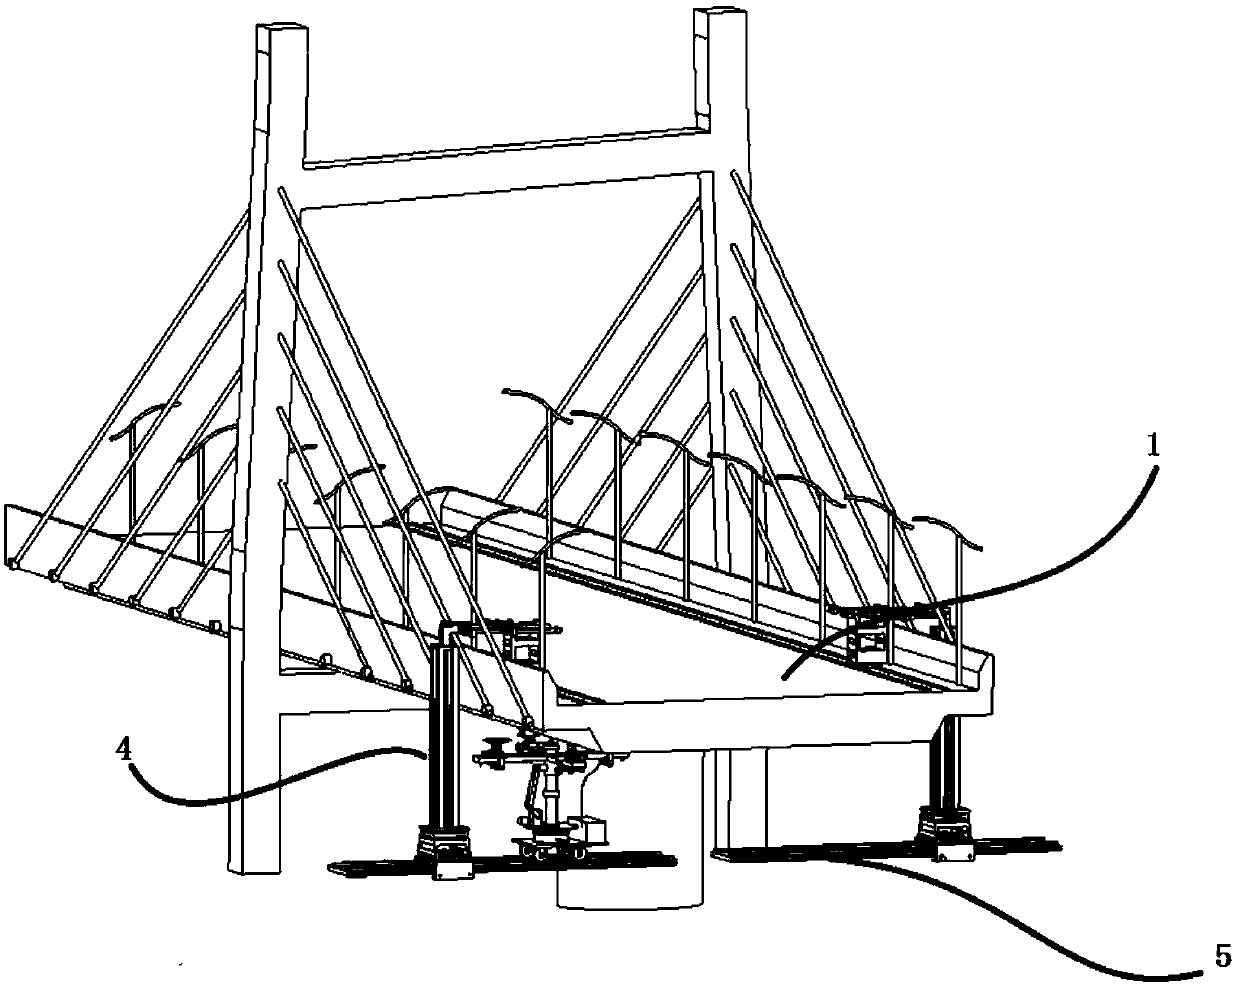 An unmanned bridge detection and maintenance device